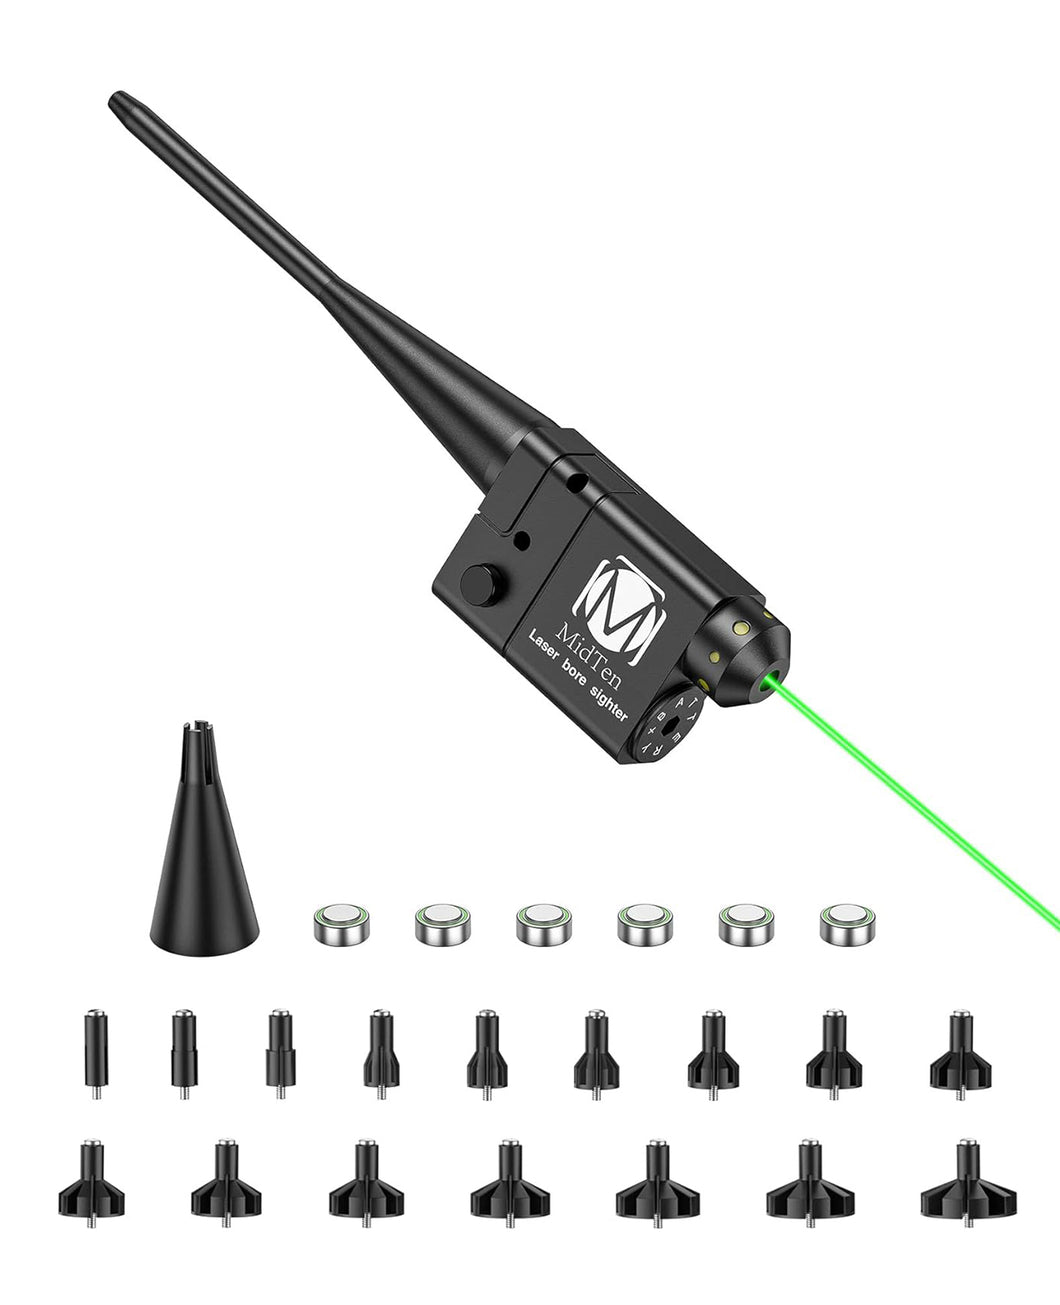 MidTen Bore Sight Kit Green Laser Boresighter with 16pcs Adapters for 0.17-12GA Calibers